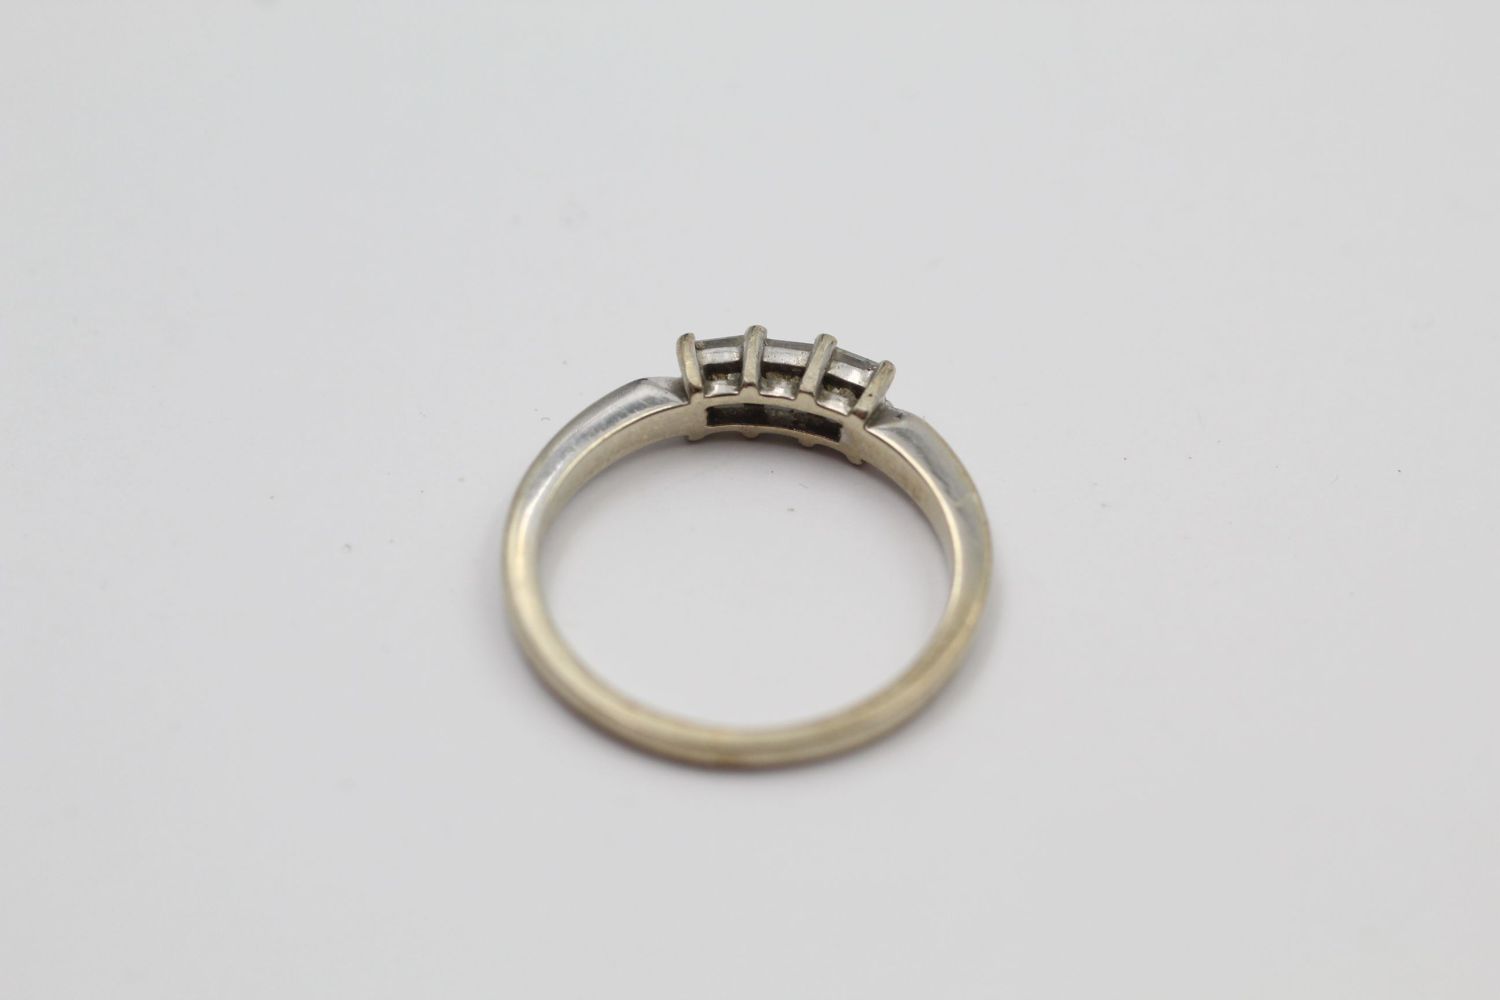 14ct Gold trilogy diamond ring 2.1 grams gross - Image 3 of 5